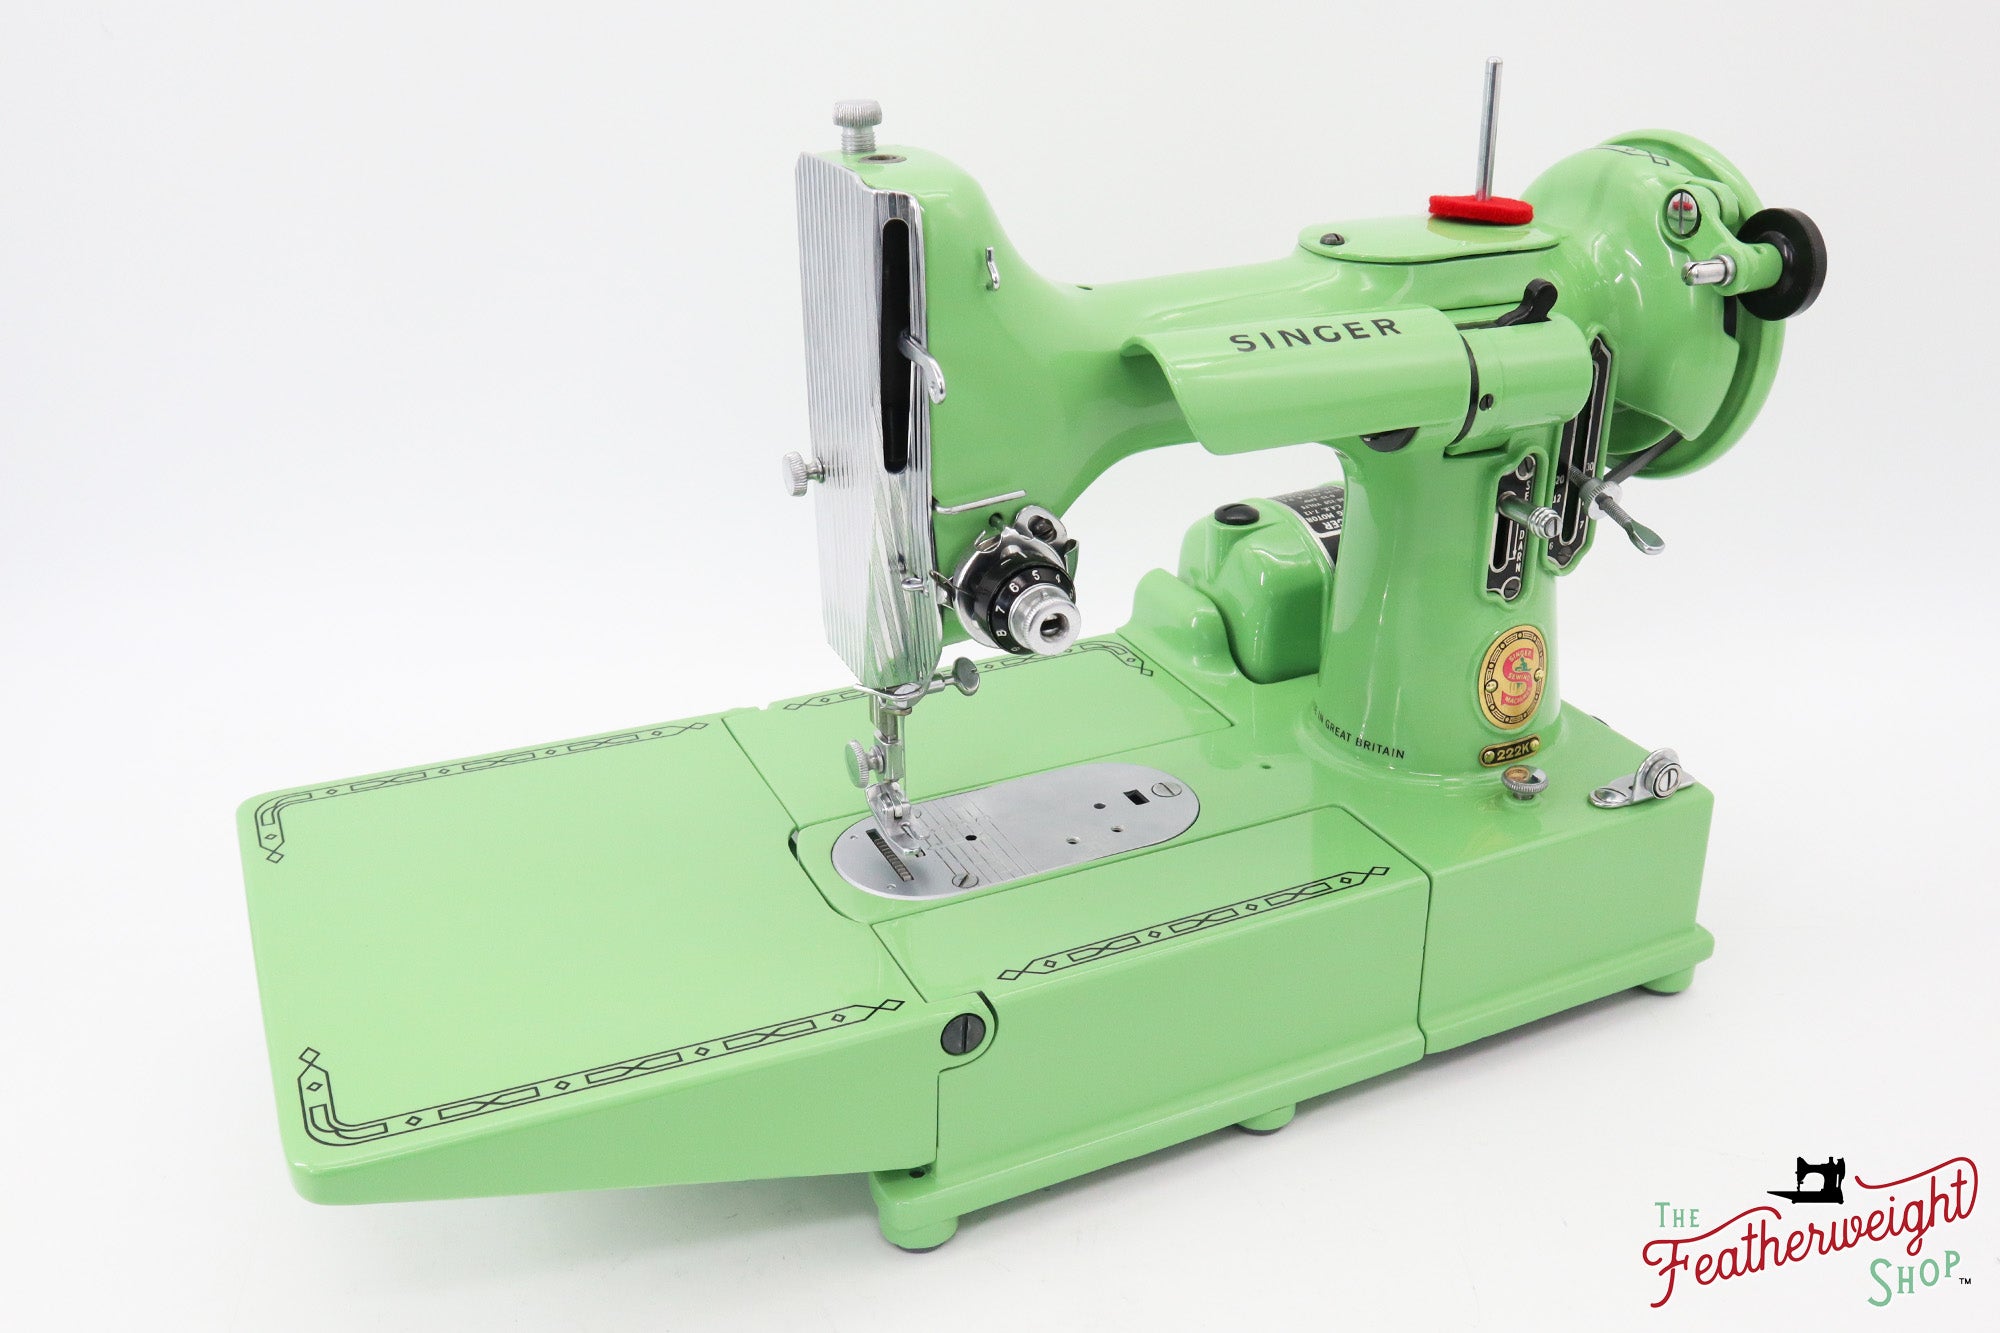 Singer Simple Sewing Machine - Sherwood Auctions